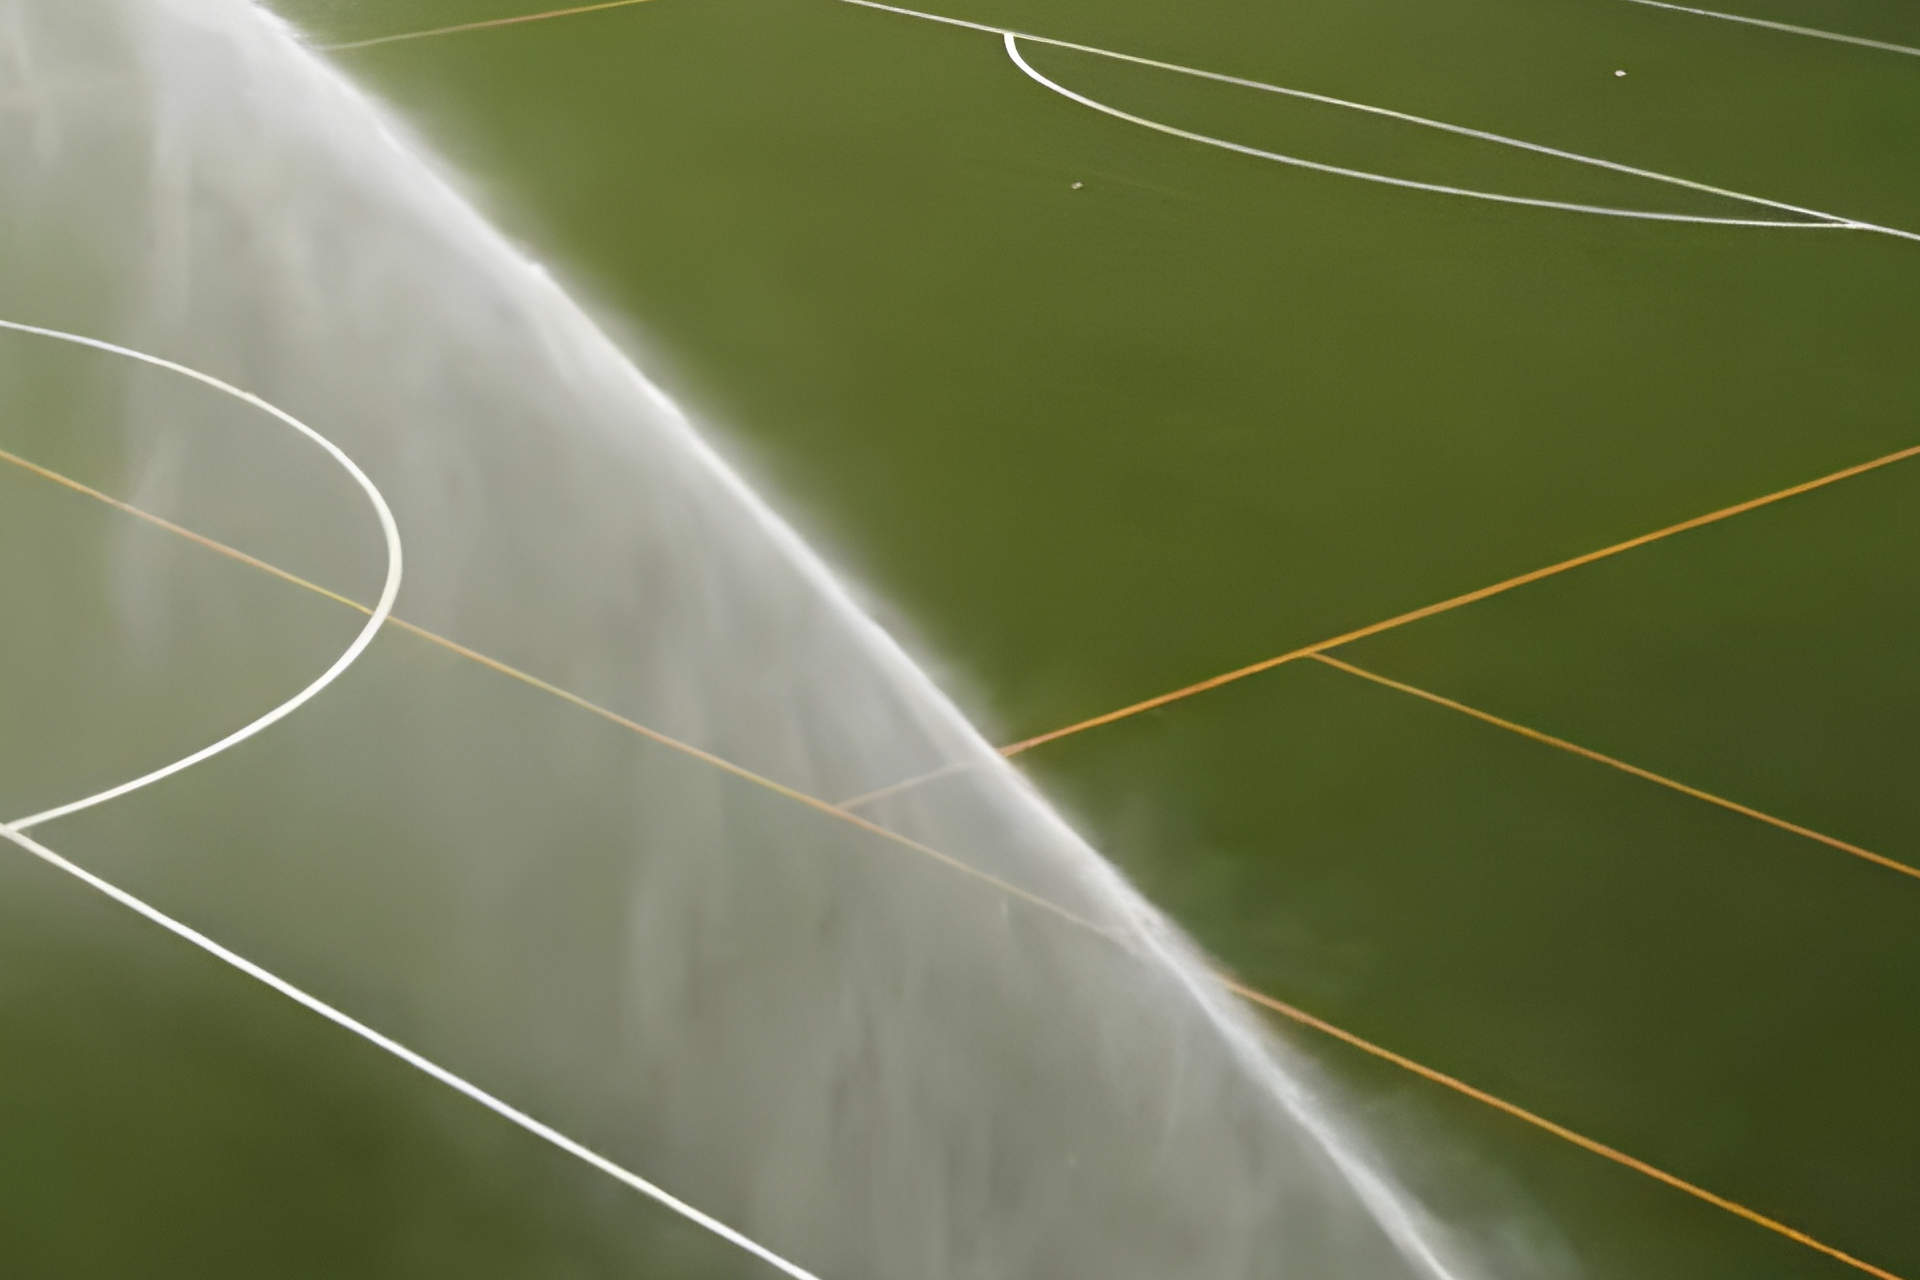 Why Do They Water Artificial Turf? An Important Aspect of Maintaining Synthetic Grass